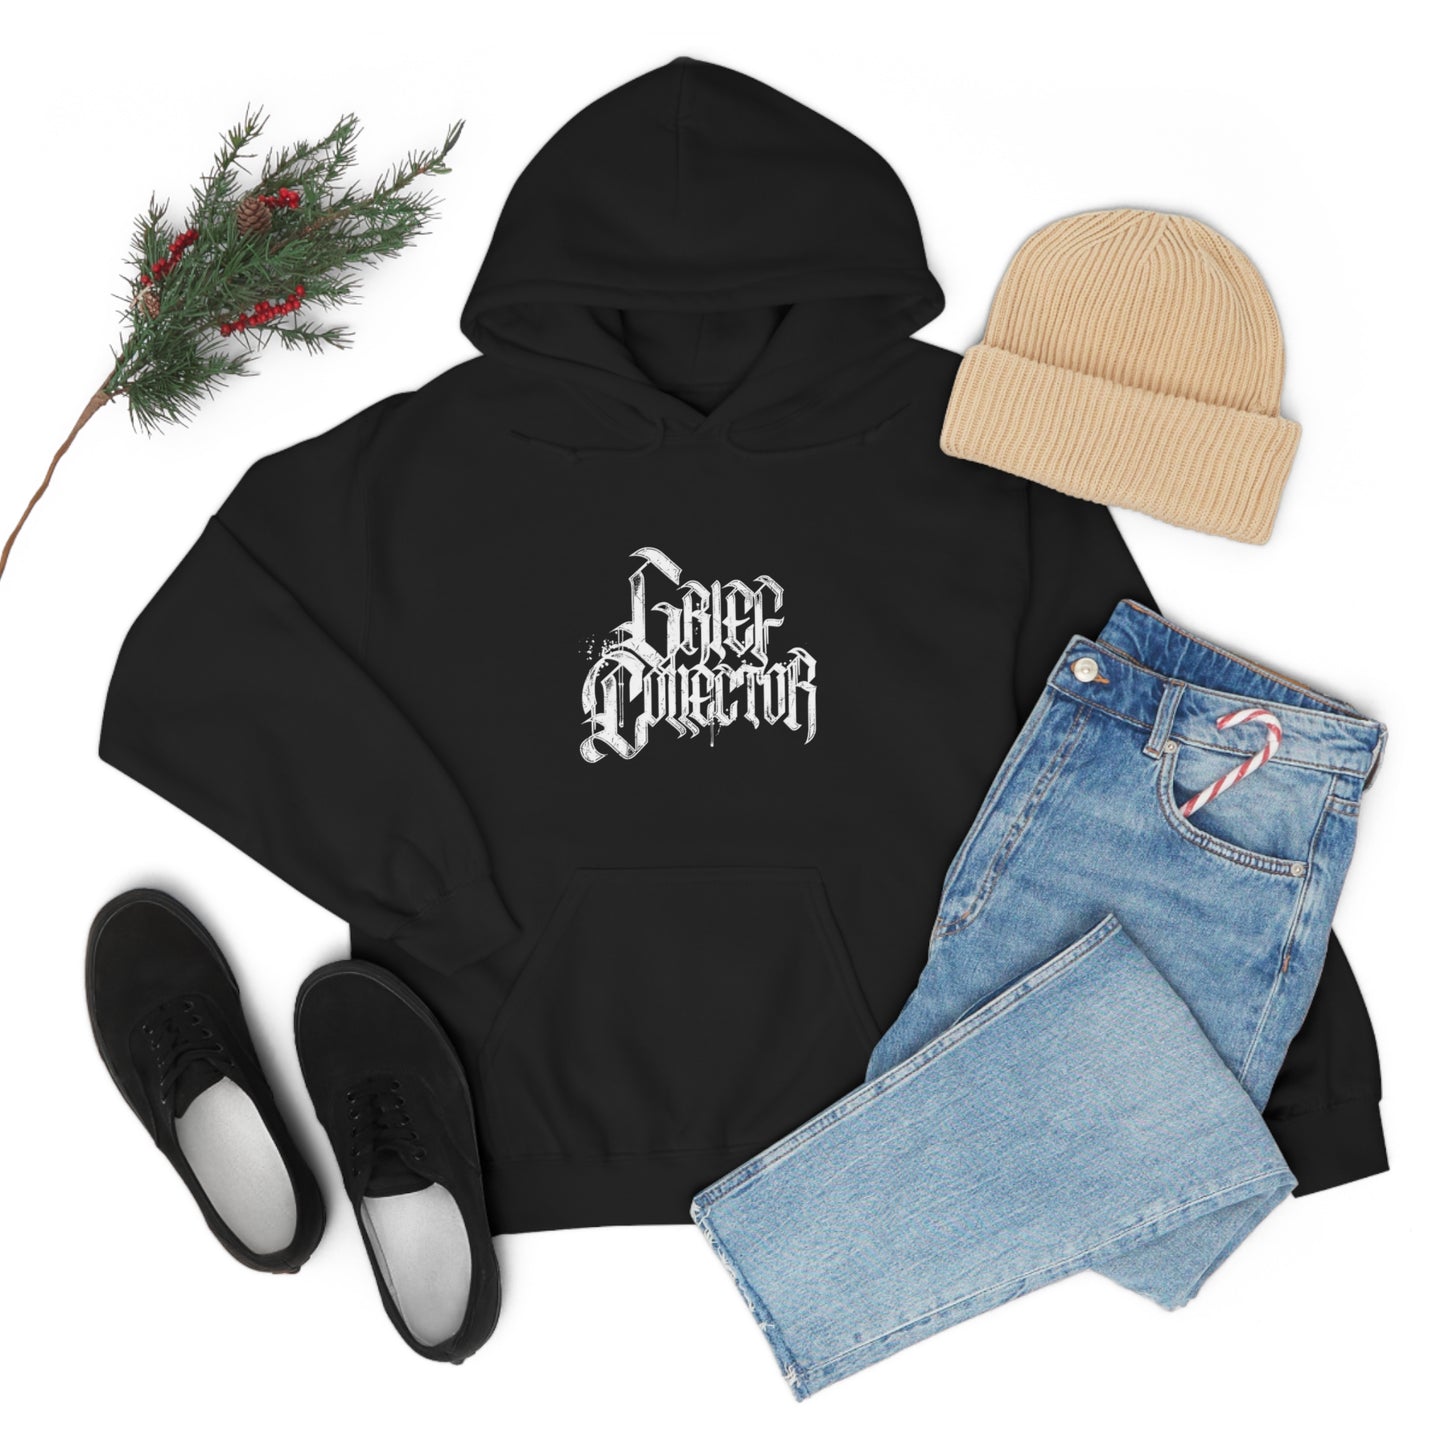 Grief Collector - Follow Me - Hoodie